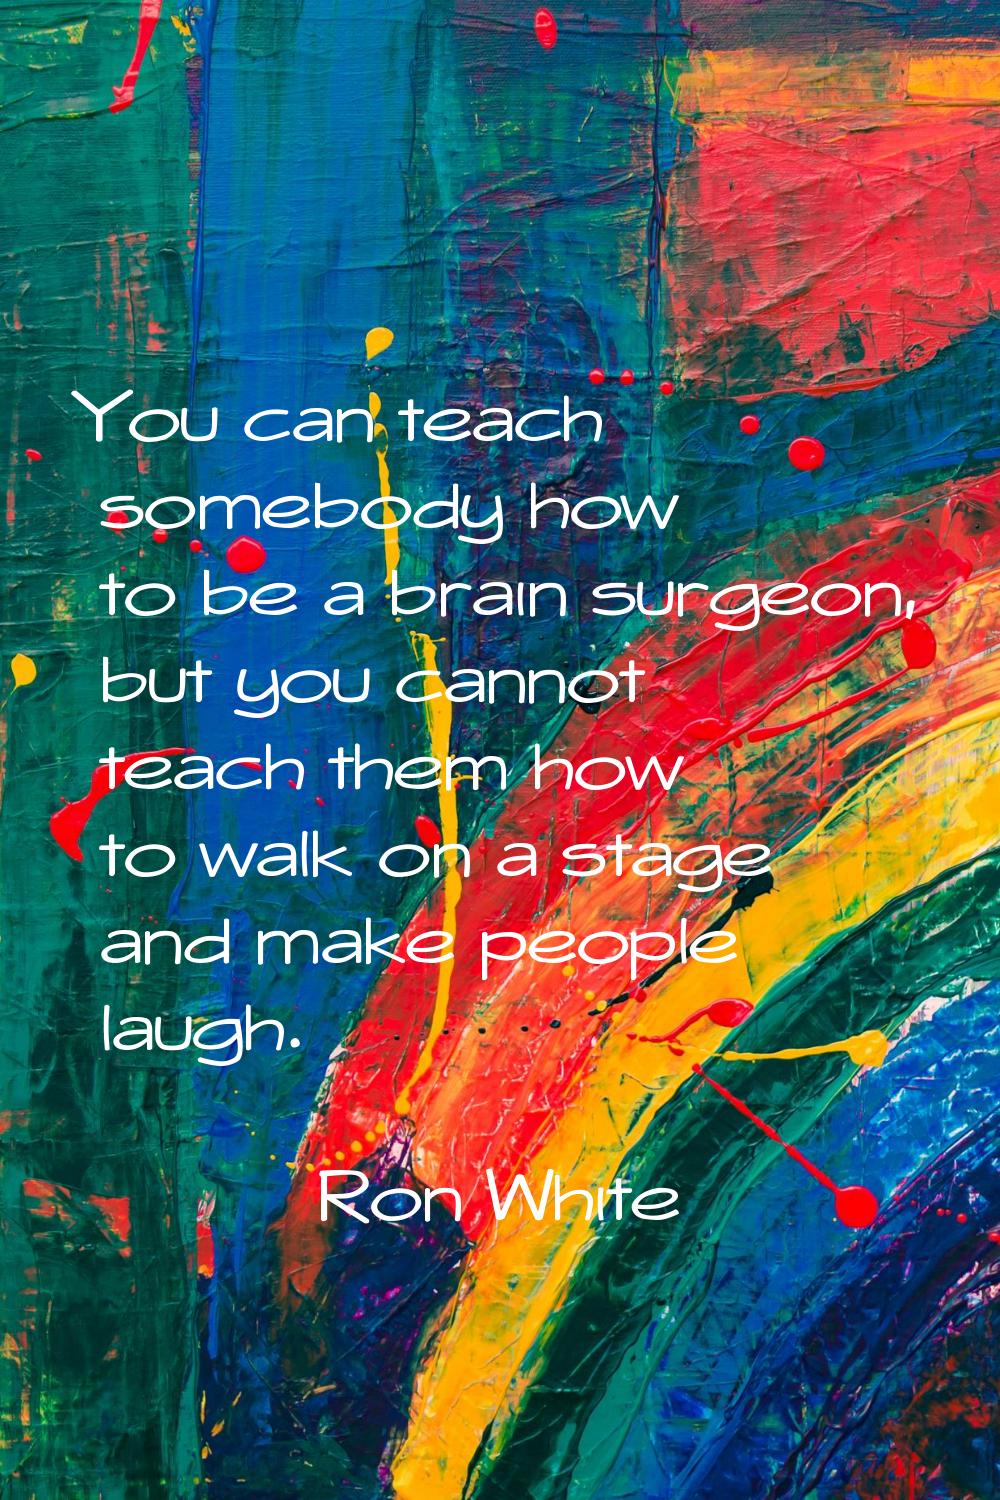 You can teach somebody how to be a brain surgeon, but you cannot teach them how to walk on a stage 